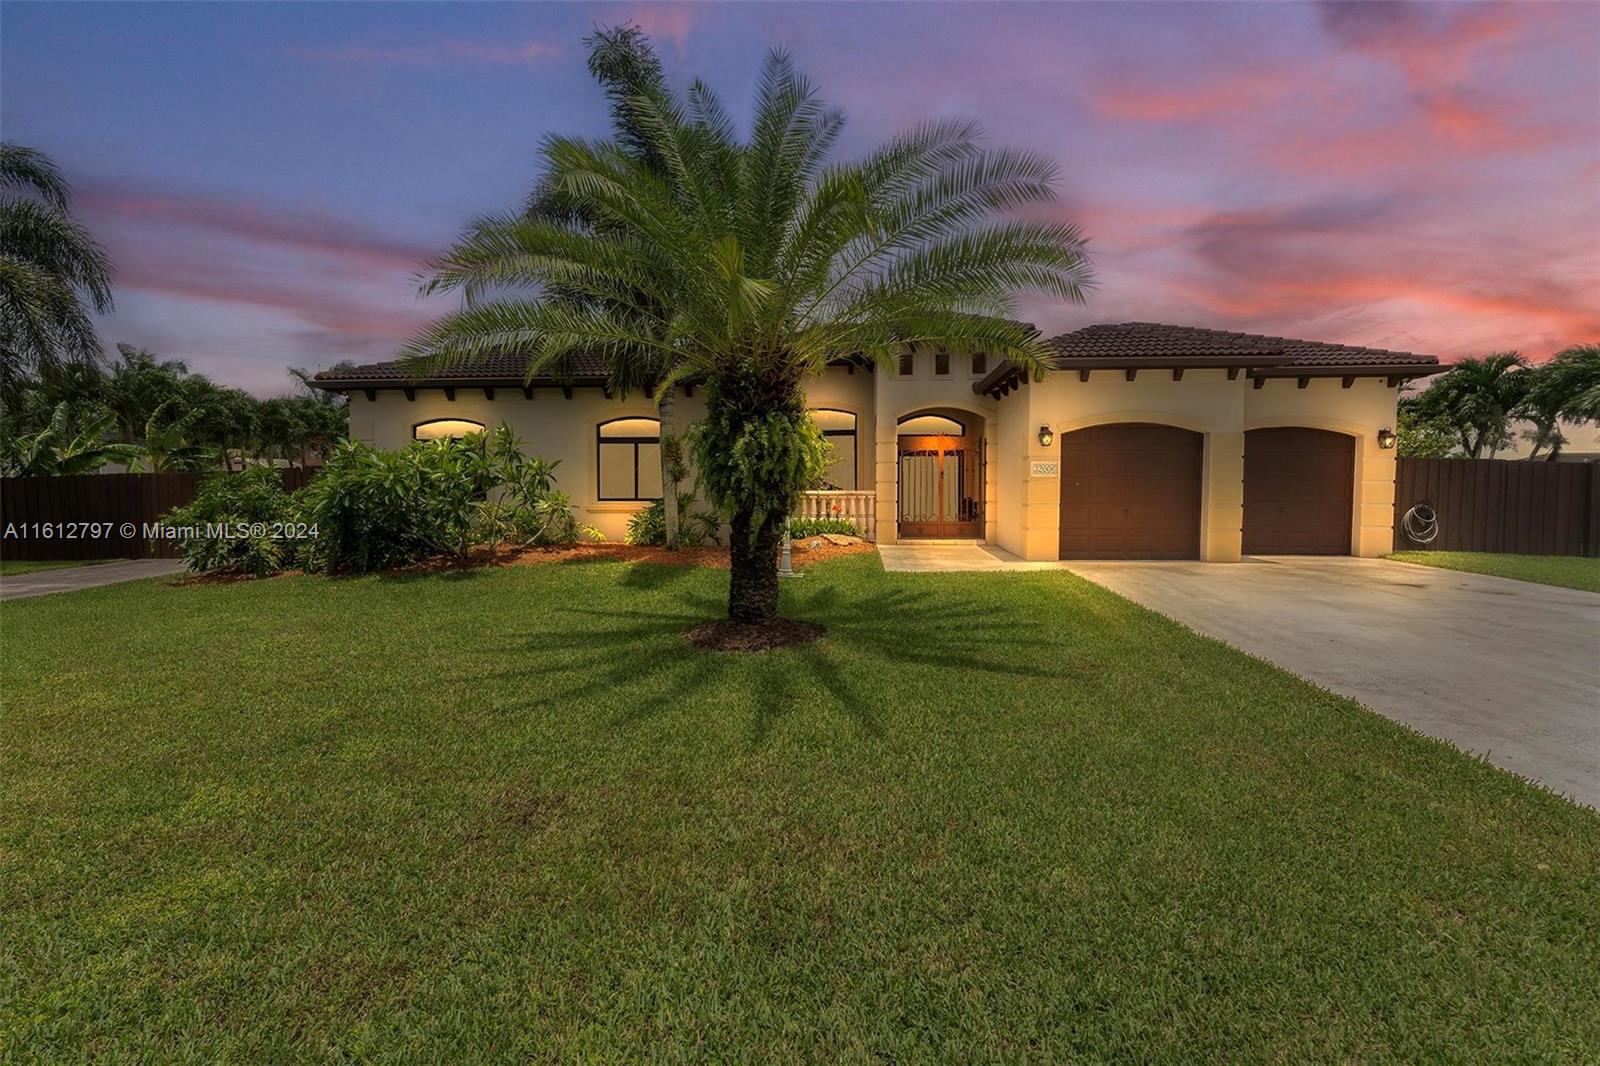 Photo 1 of 32006 Sw 206th Ave, Homestead, Florida, $985,000, Web #: 11612797